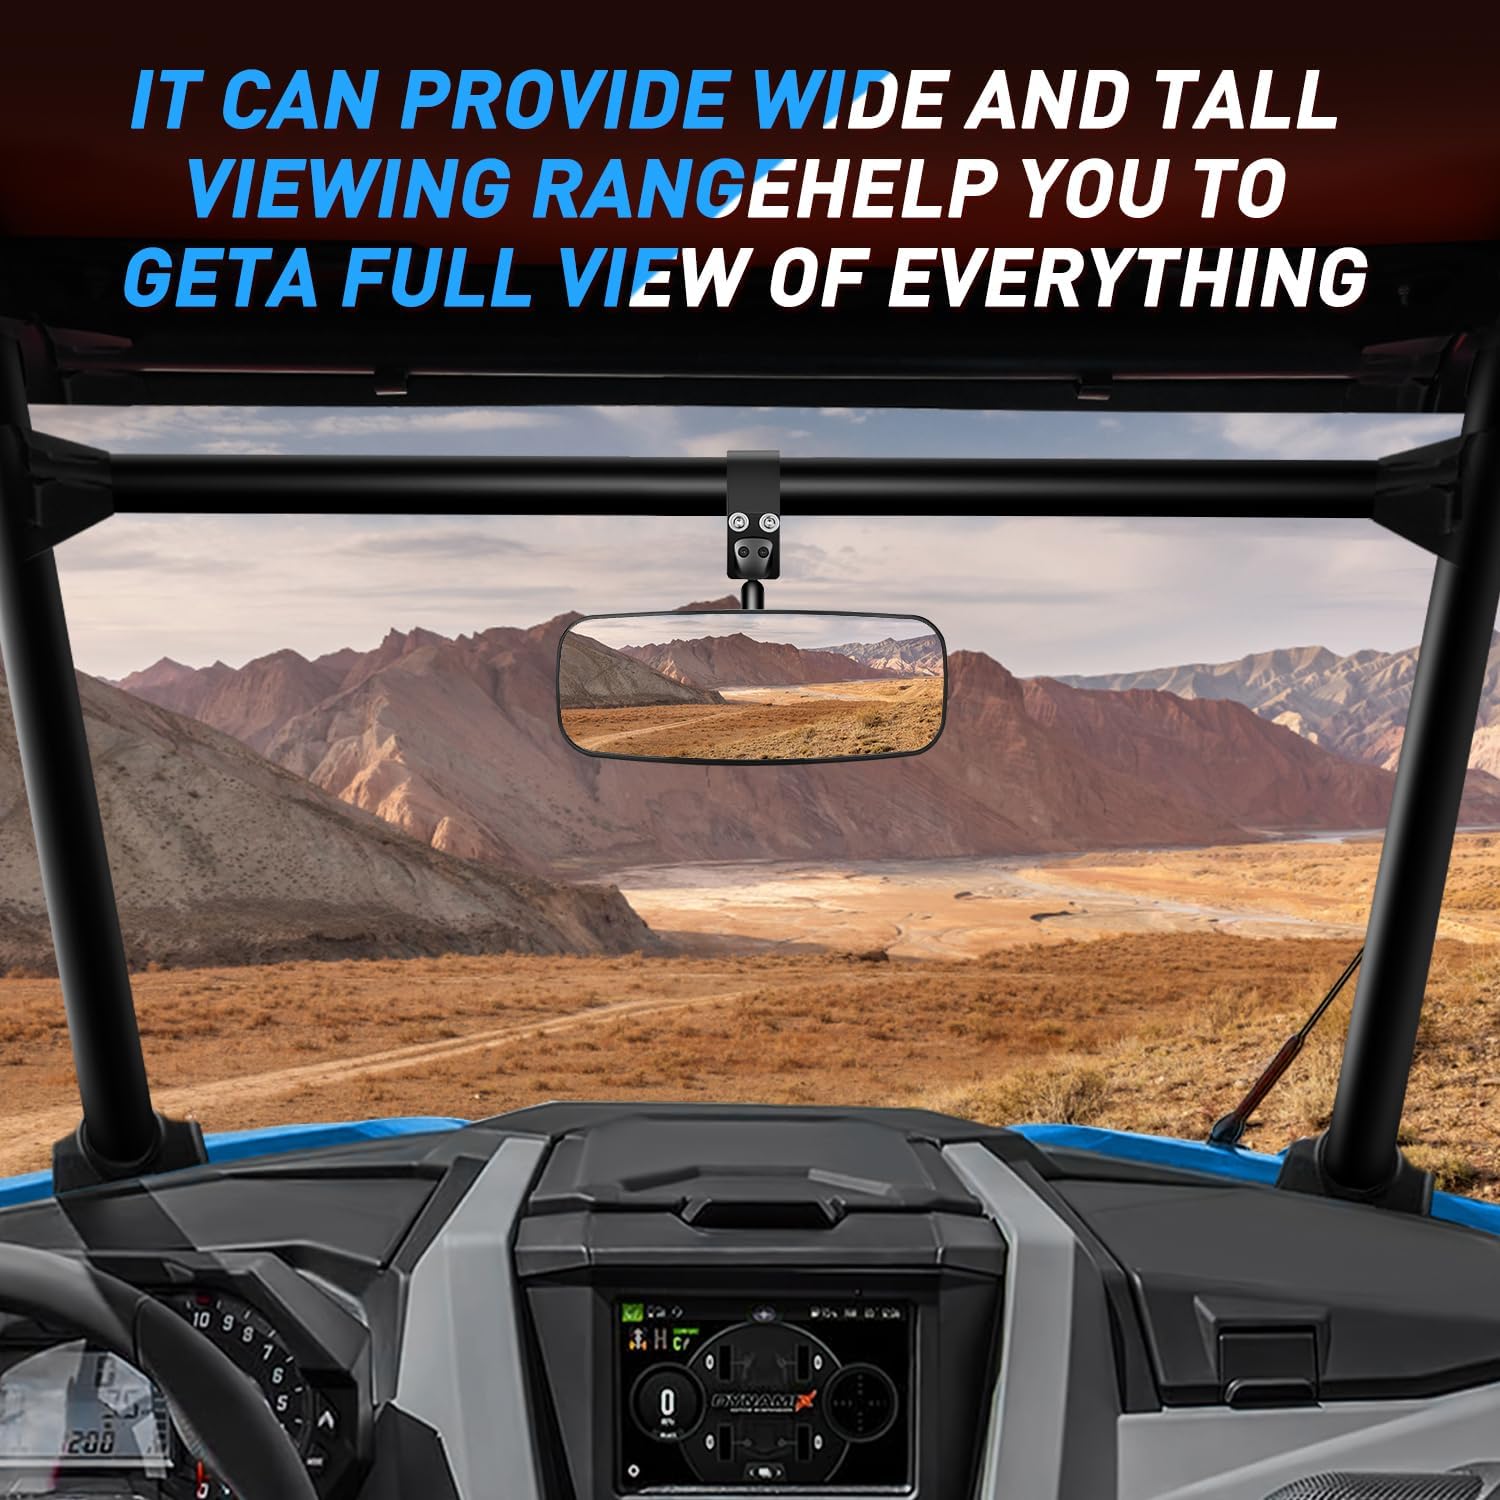 UTV Rear View Mirror 12" Wide Clear Convex Center Mirror with 3/4 1.75" to 2" Clamps for Polaris RZR PRO XP R Pioneer 1000 Can Am Maverick X3 Kawasaki Nilight